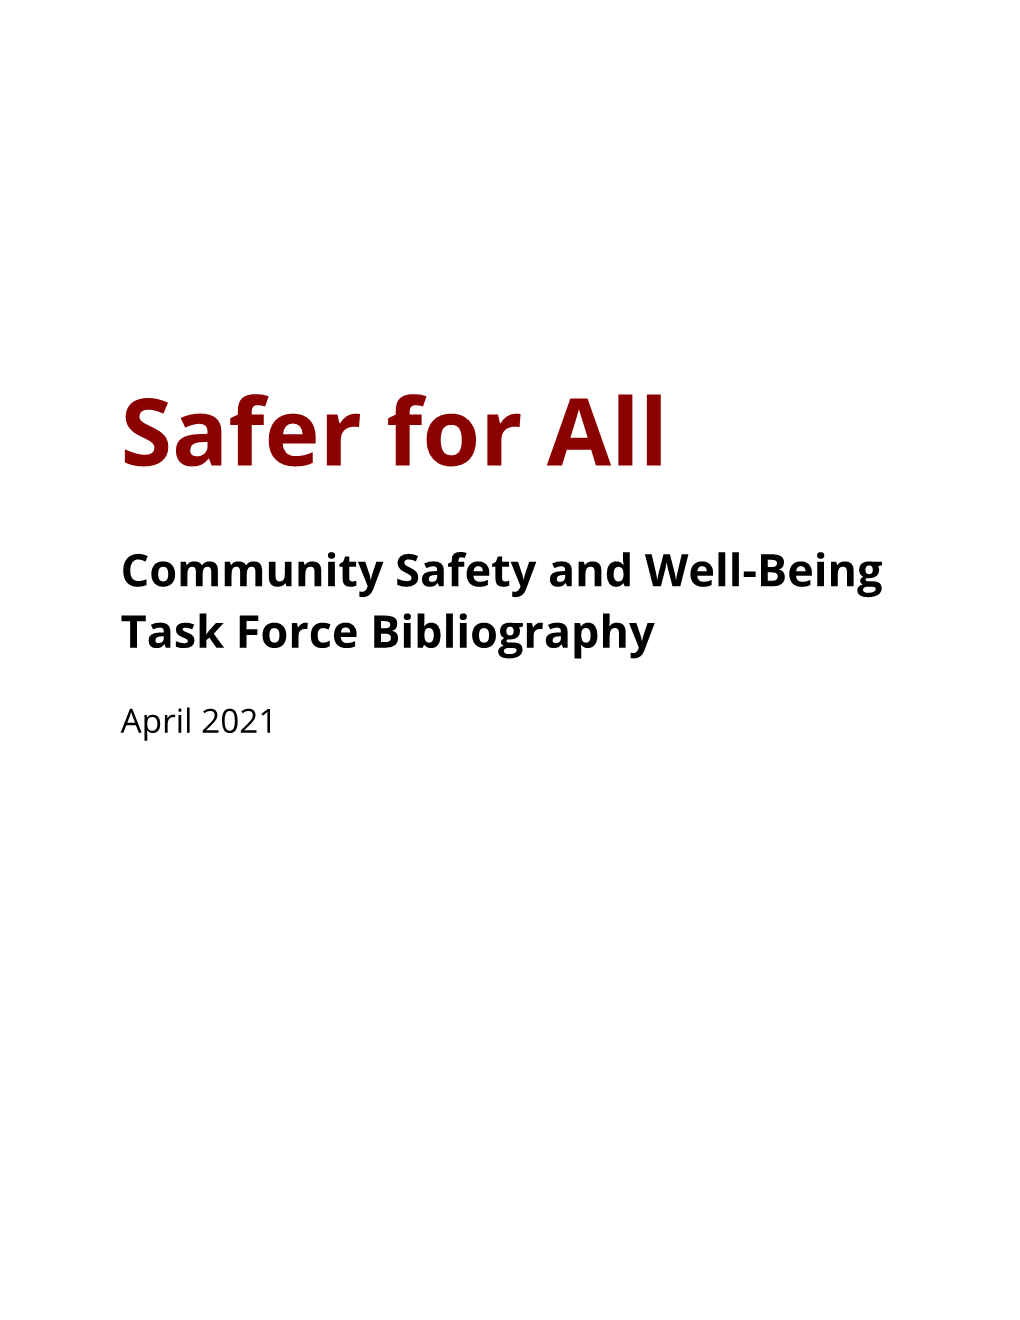 Community Safety and Well-Being Task Force Bibliography